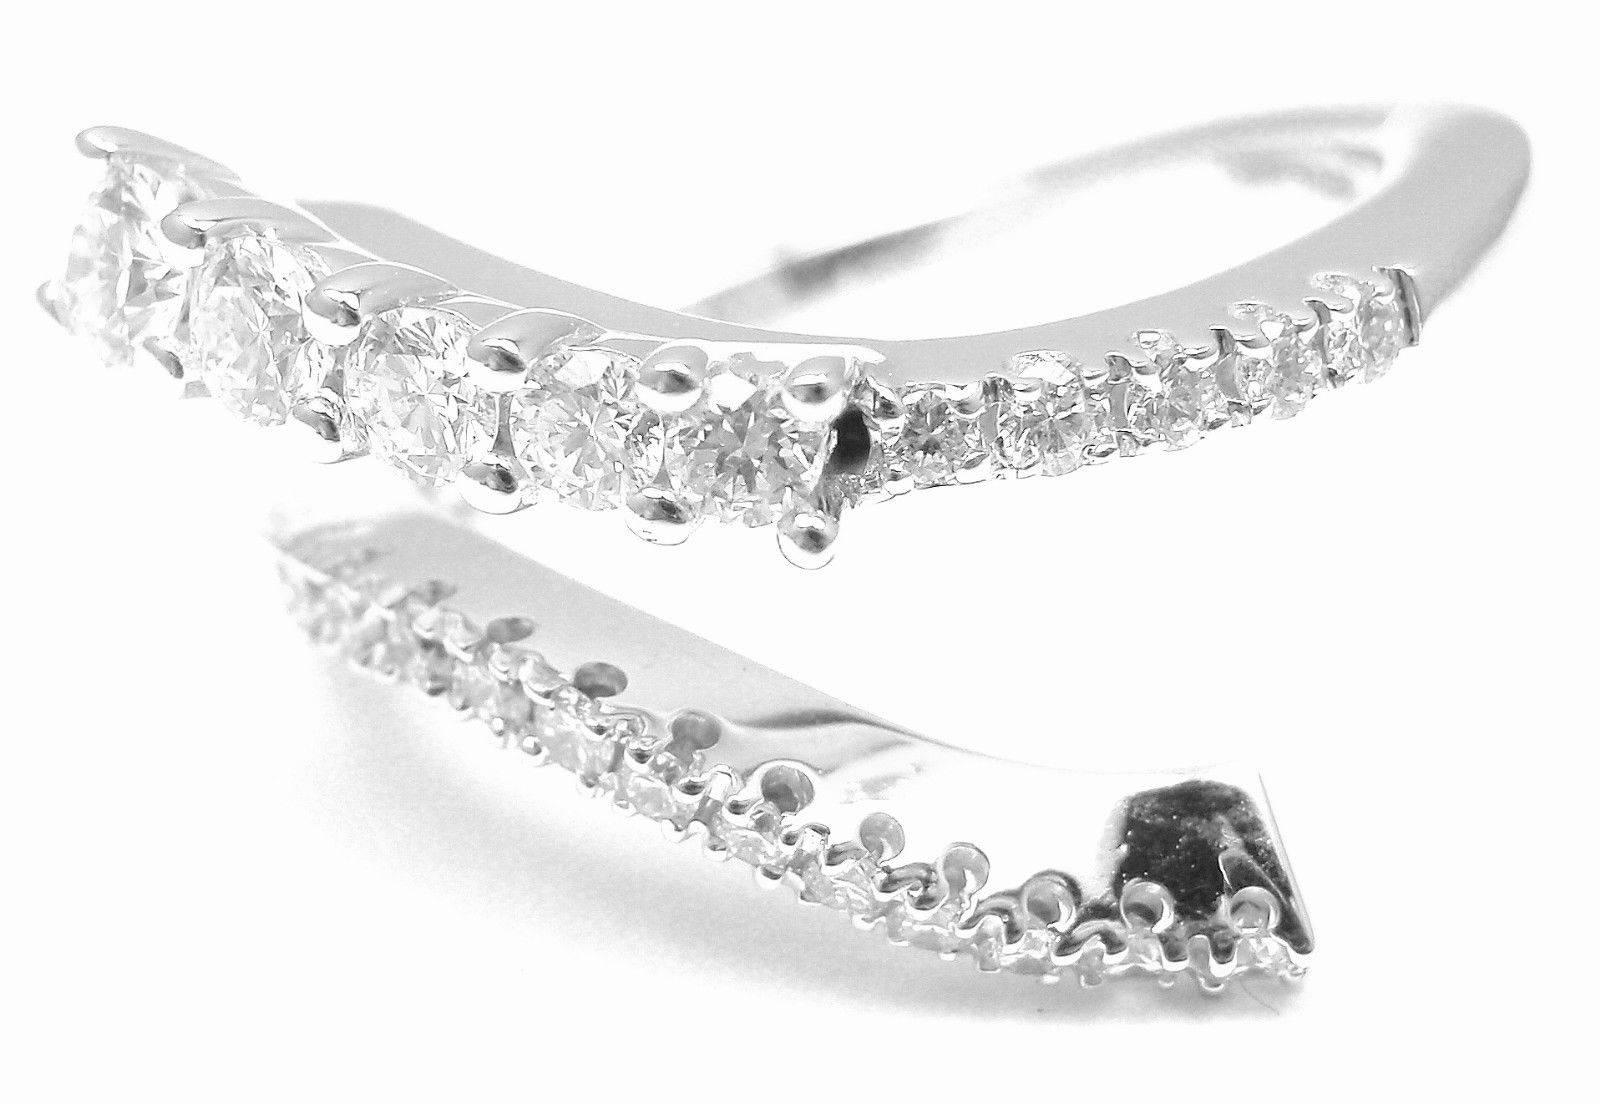 18k White Gold Diamond Eden Band Ring by Damiani.
With Round brilliant cut diamonds VS1 clarity, G color 
total weight approx. 0.65ct
This ring comes with Box, Certificate and Tag.
Retail Price: $8,590.00
Details:
Size: 7
Weight: 5 grams
Width: